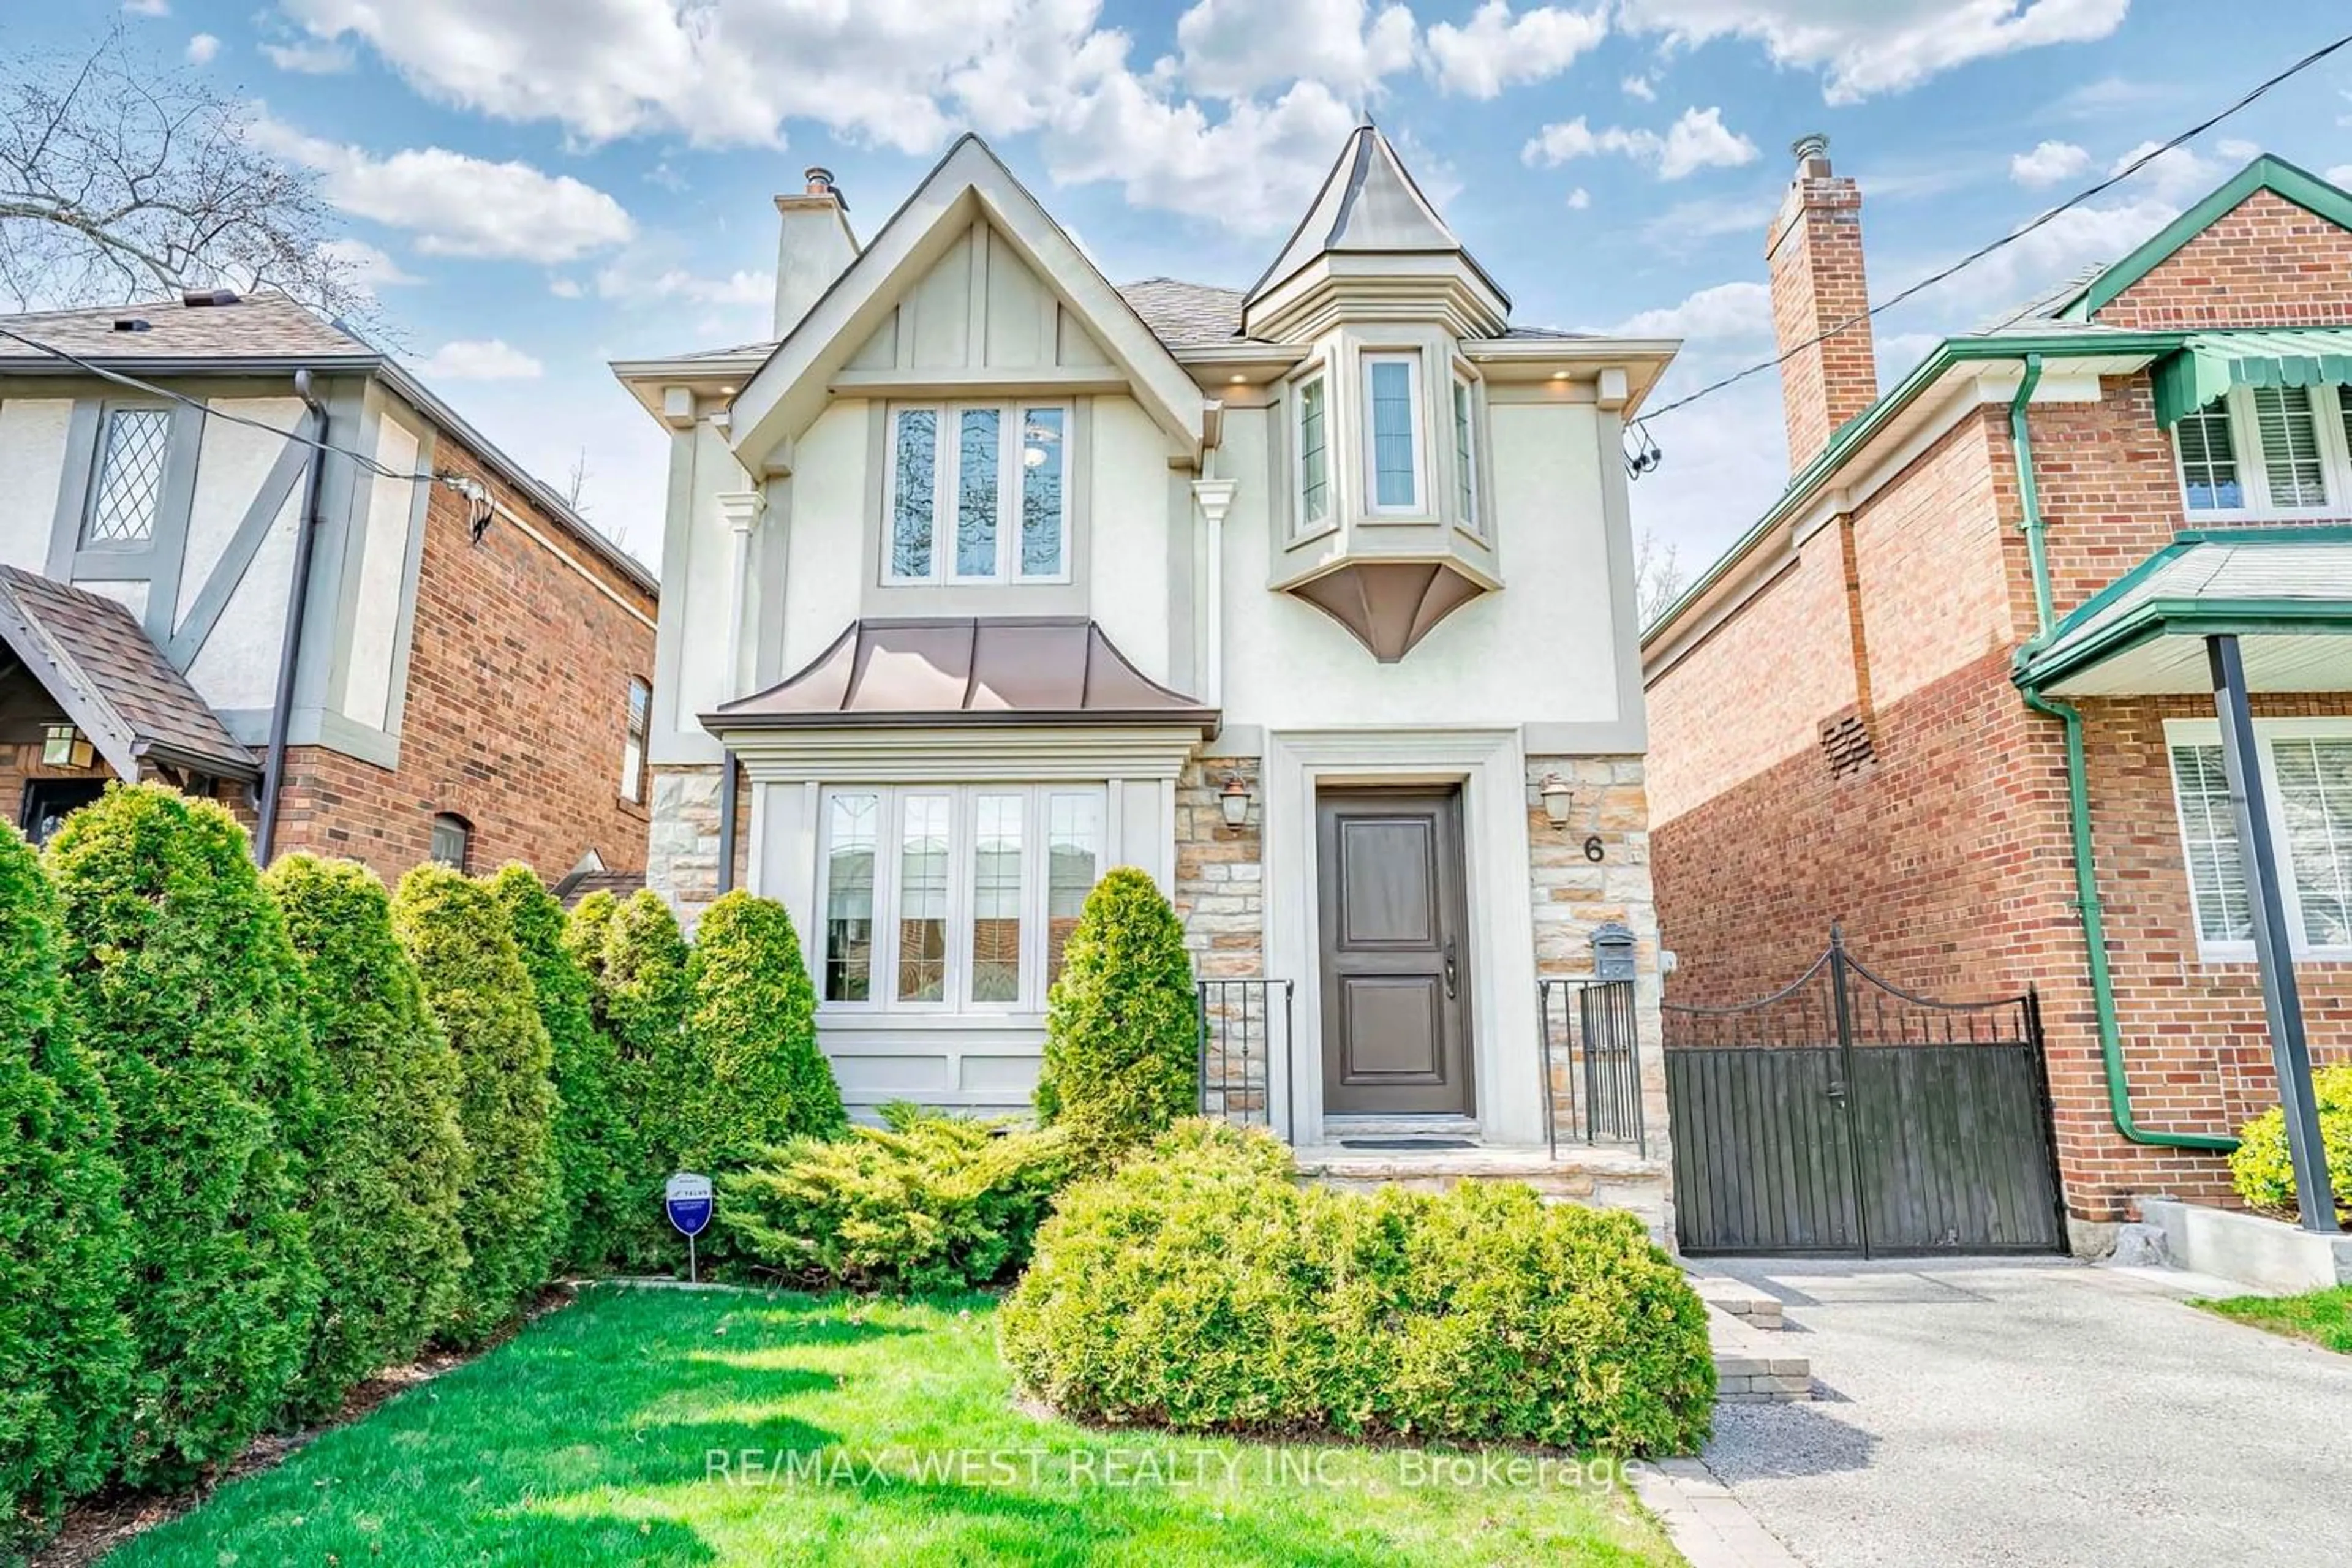 Home with brick exterior material for 6 Armadale Ave, Toronto Ontario M6S 3W8